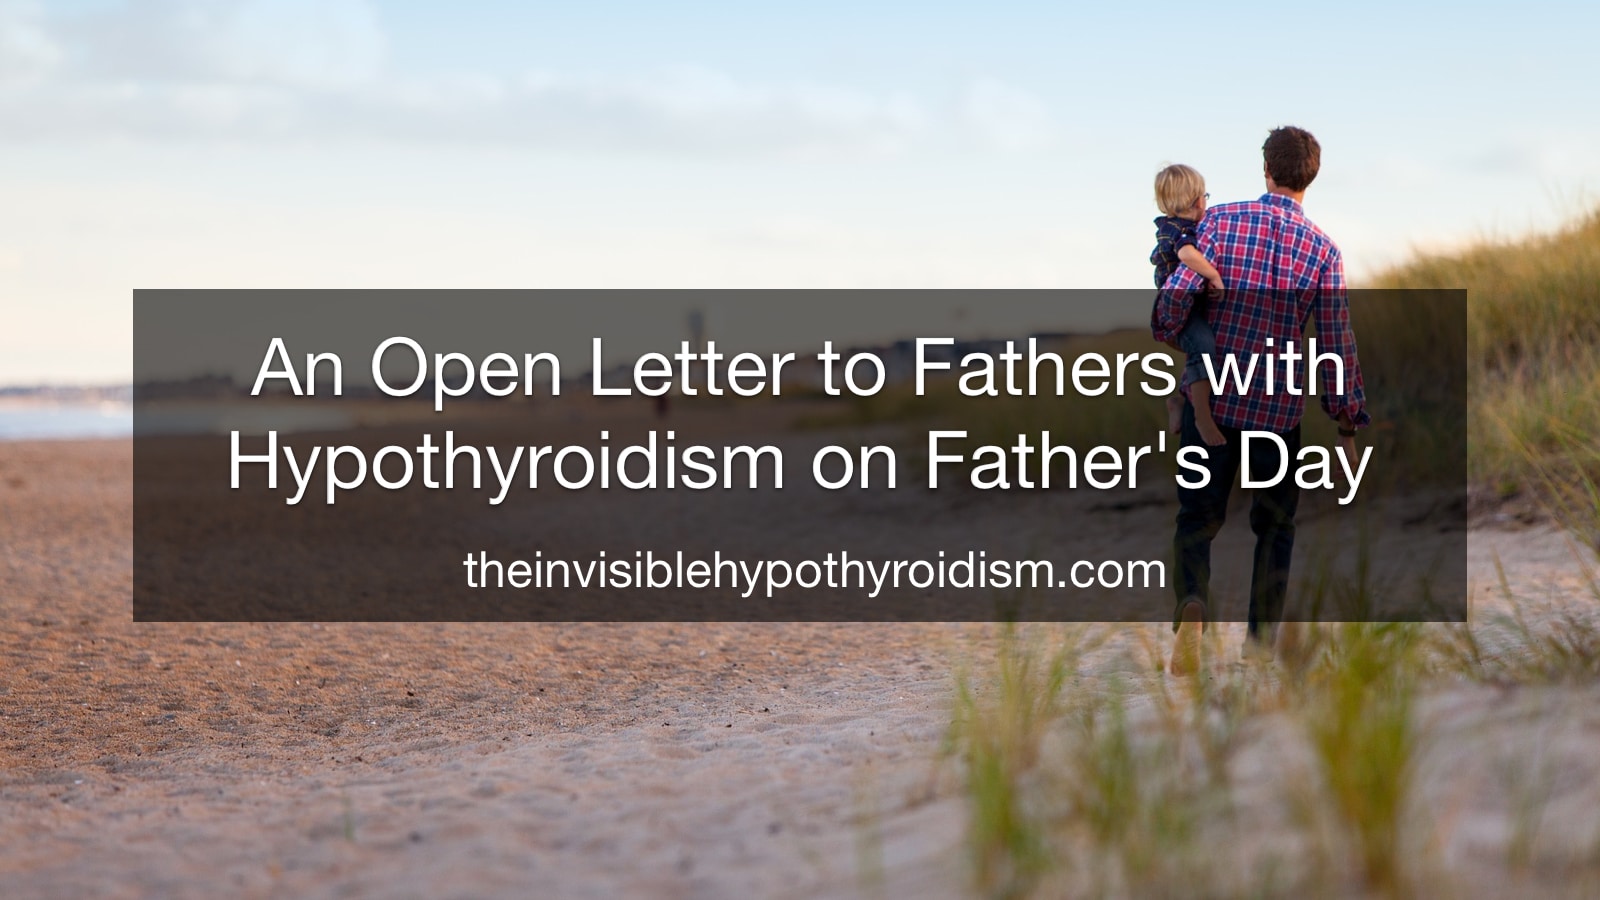 An Open Letter to Fathers with Hypothyroidism on Father's Day